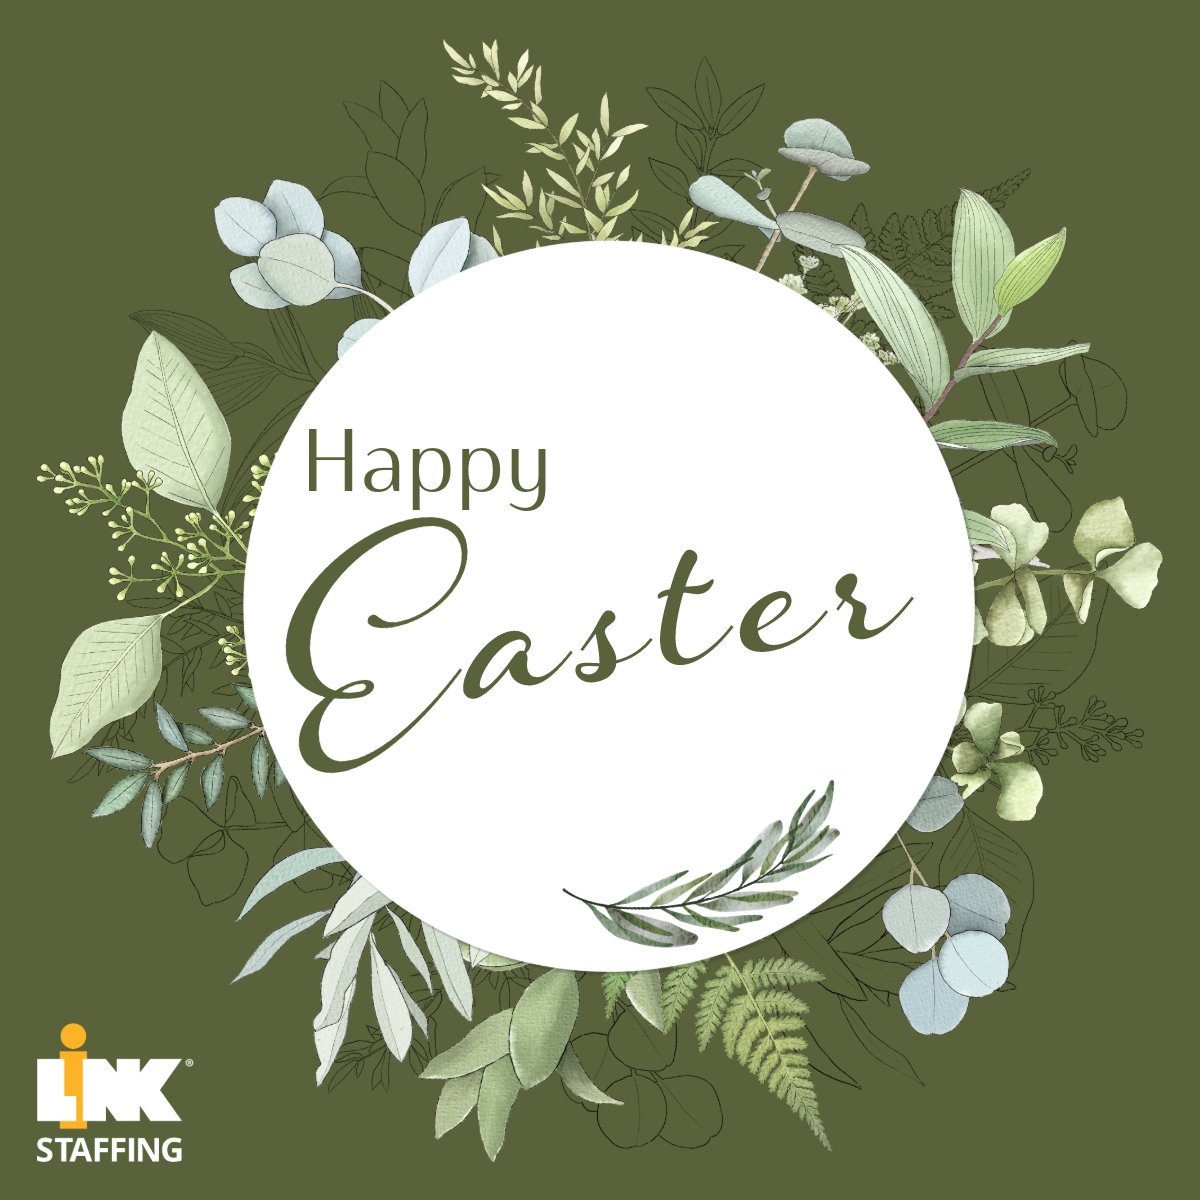 May your Easter basket be filled with joy, happiness, and peace this season and always. Happy Easter from the Link Family! #Easter2024 #Easter #LinkValues #LinkJobs